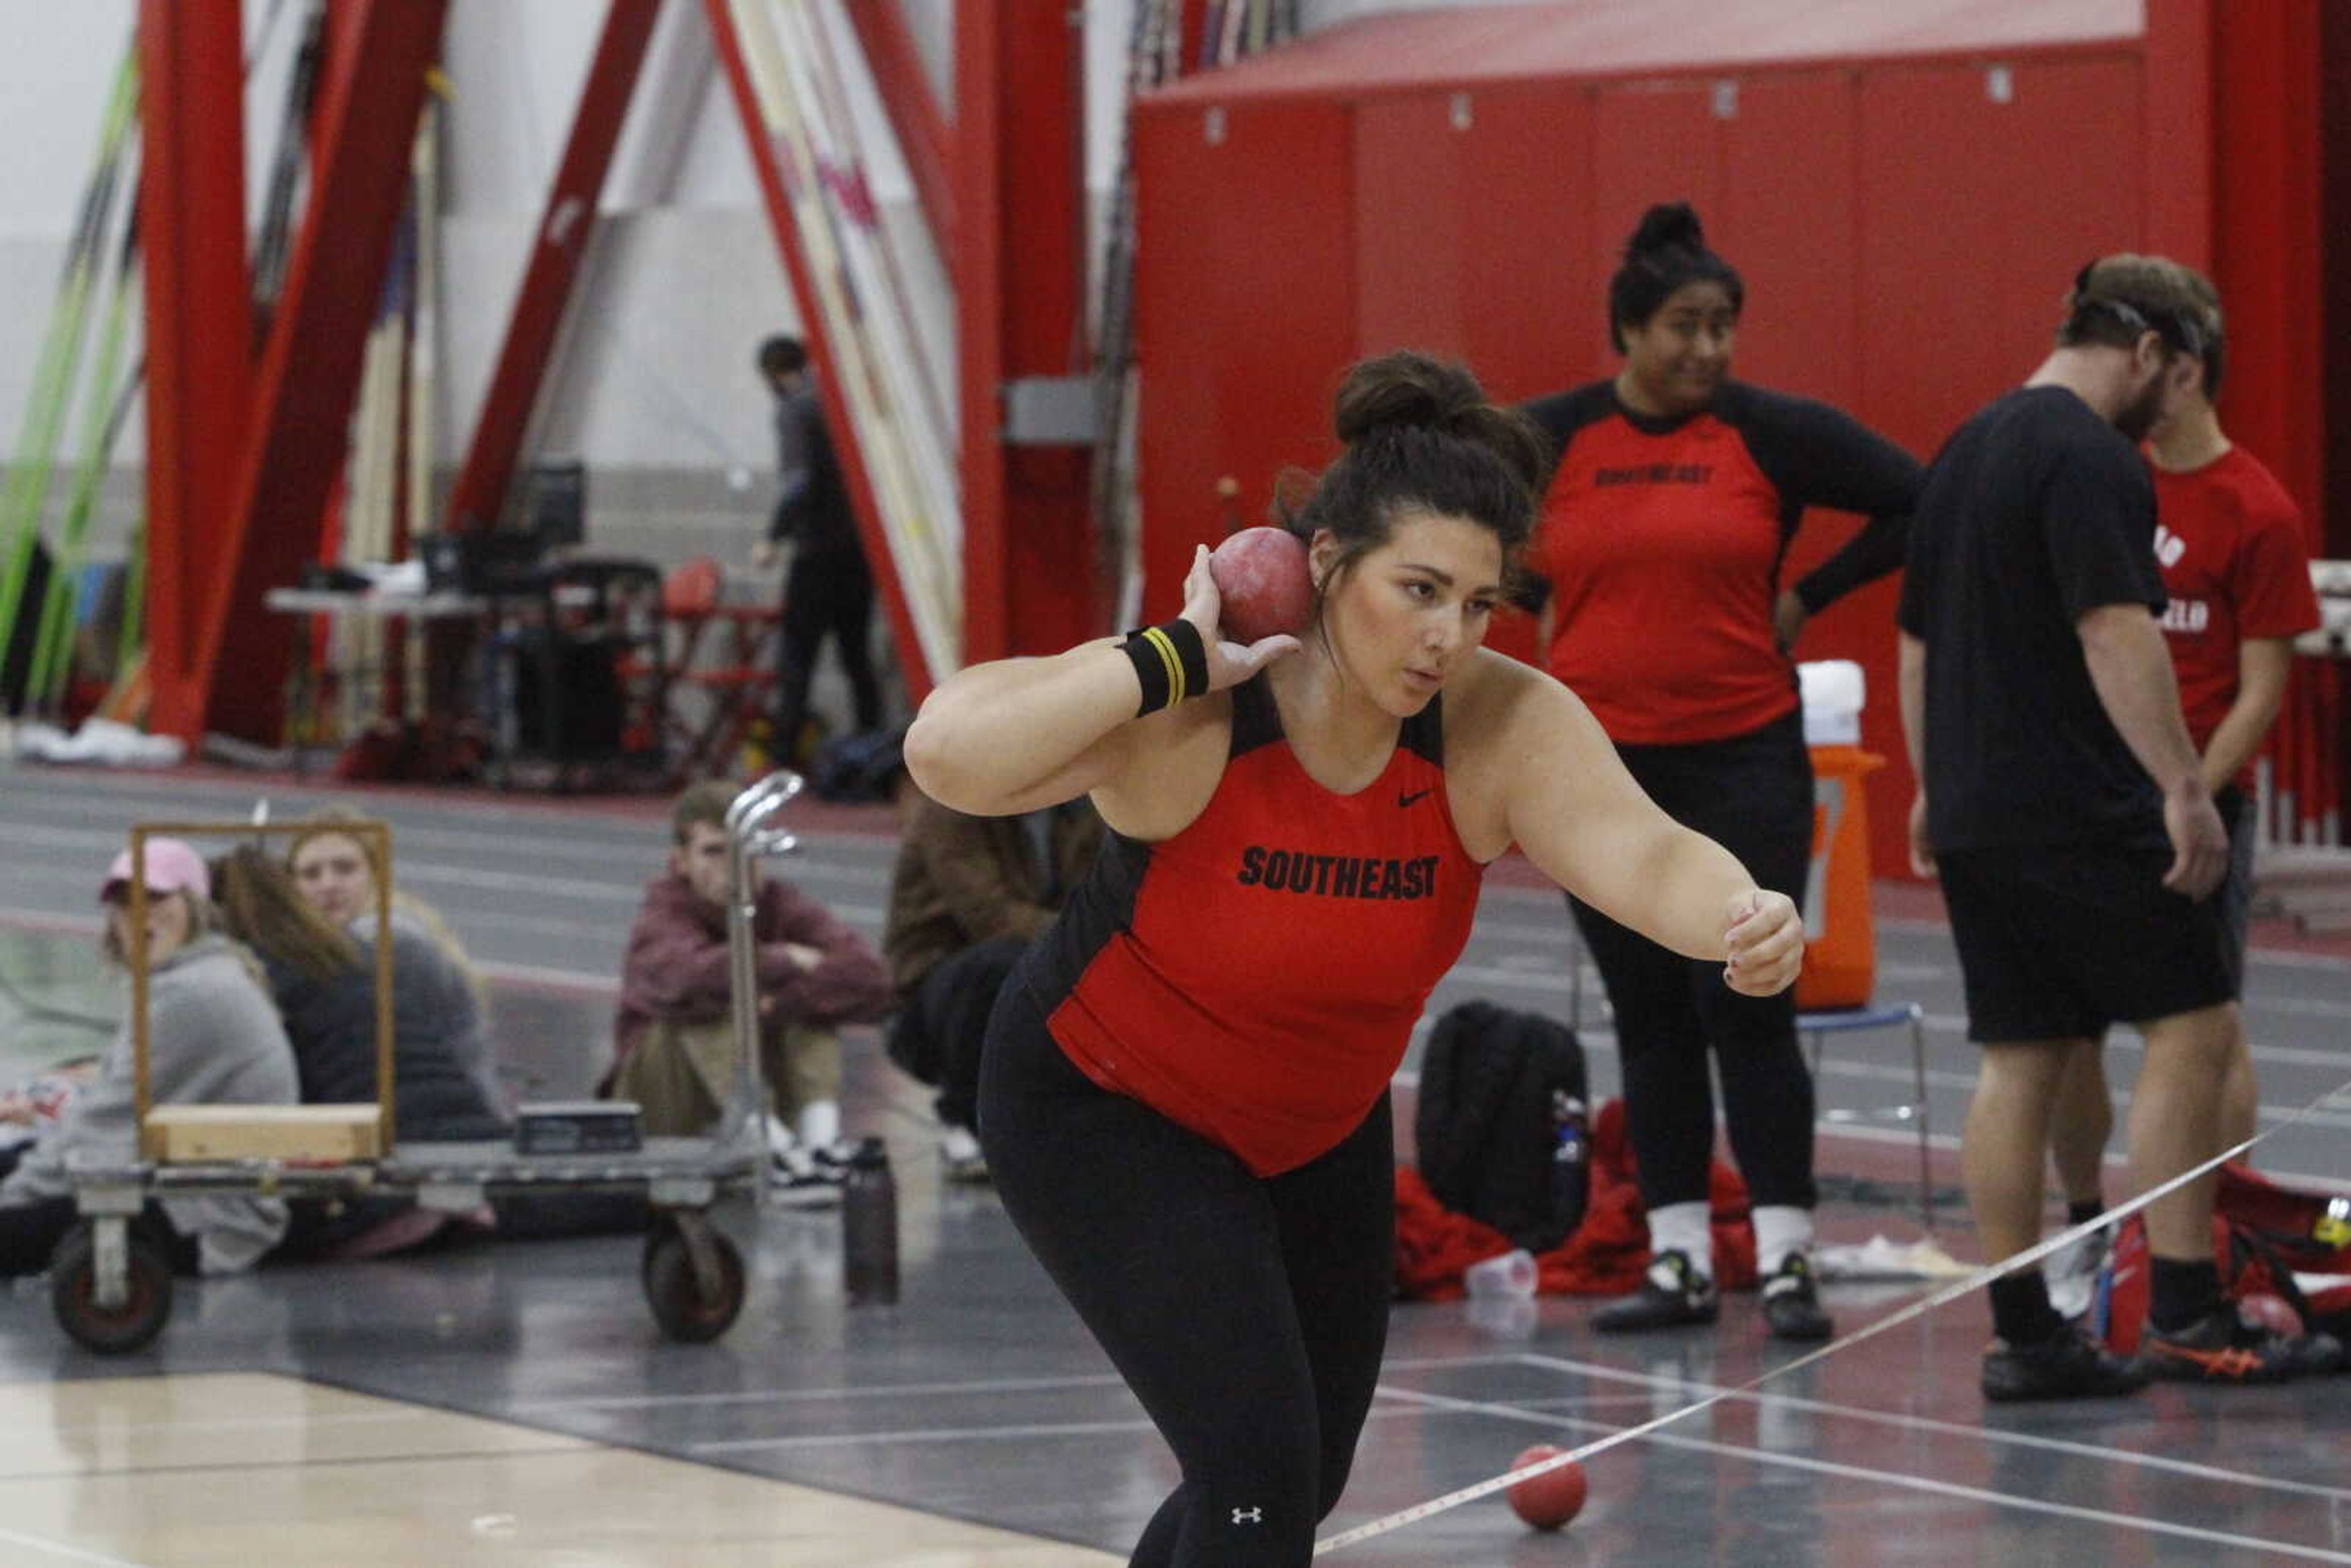 Freshman thrower Nicole Humphreys gets set to throw shot-put during the Redhawks home track meet against SIUE on Dec. 7.